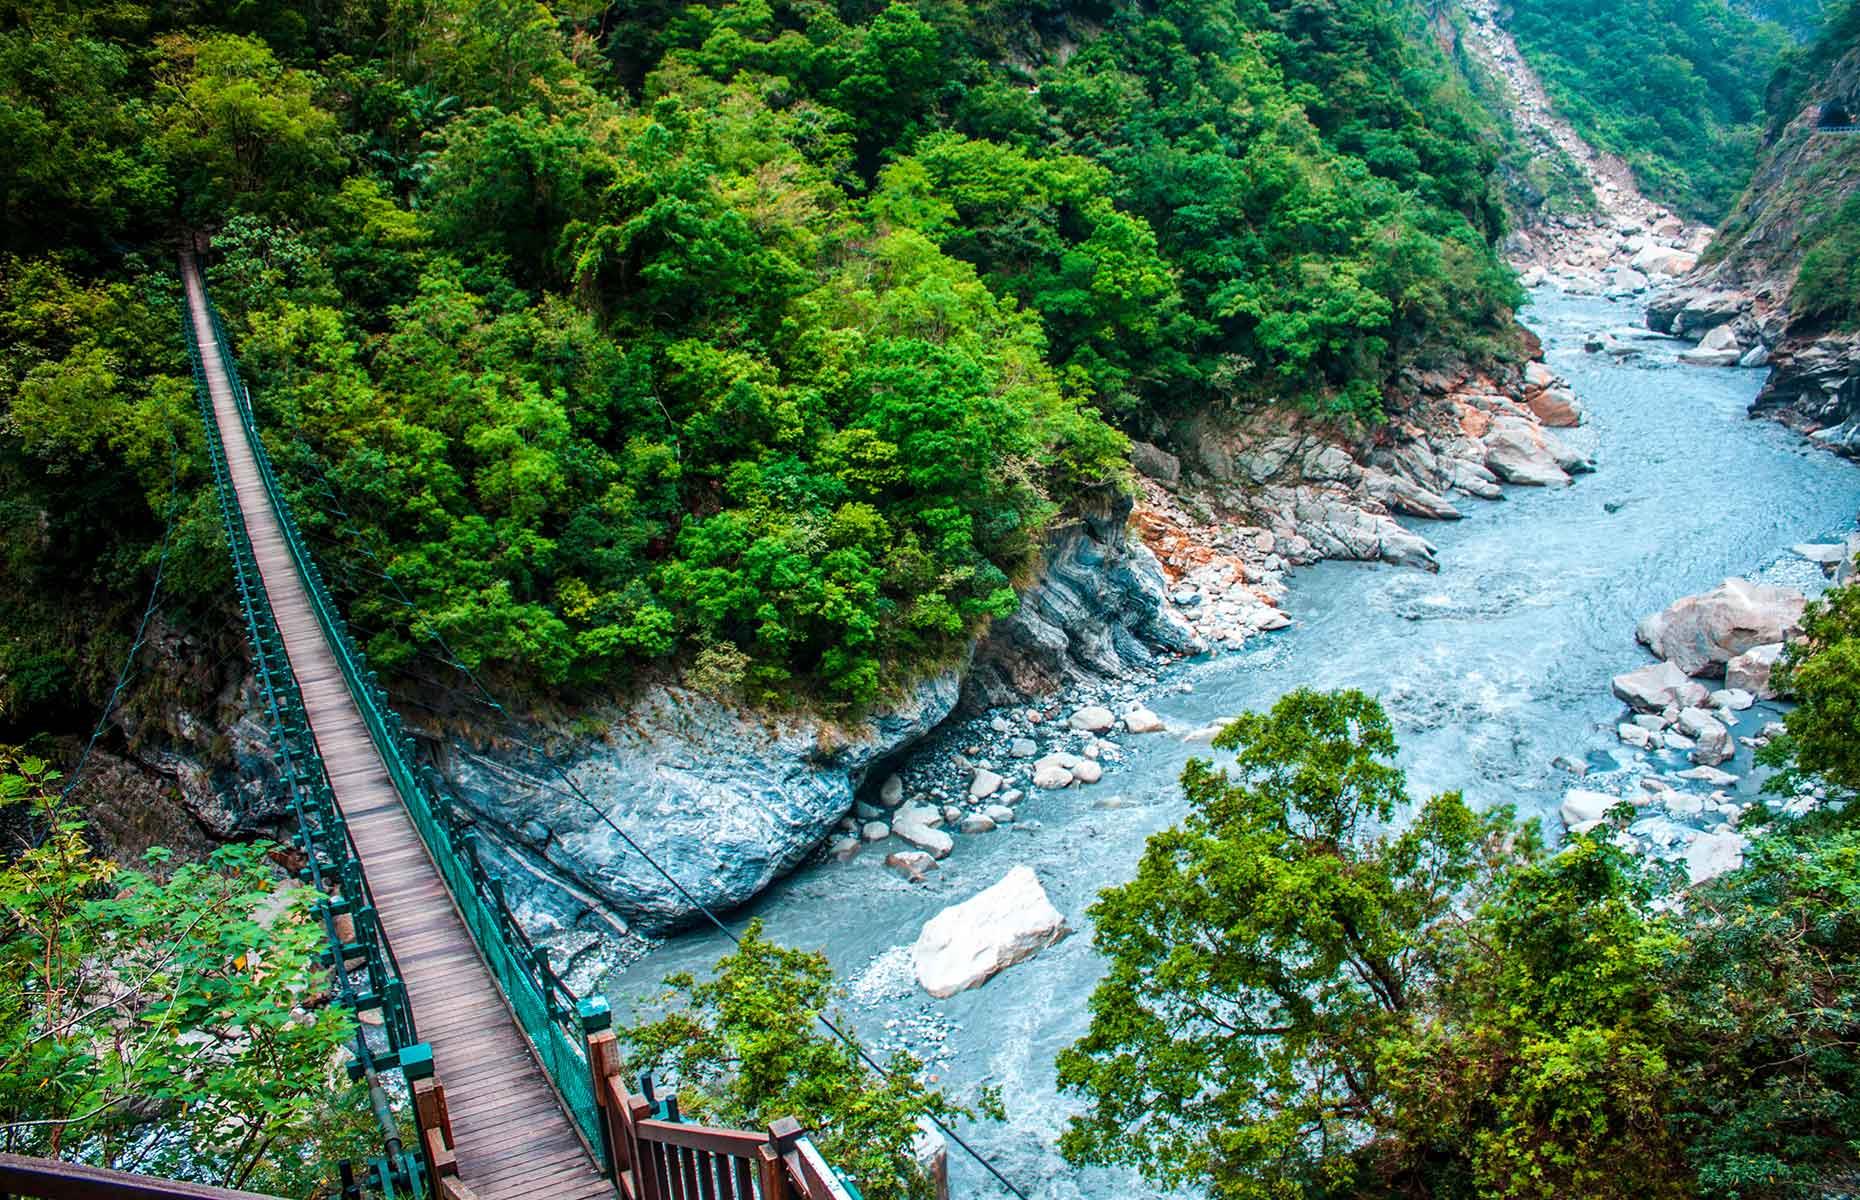 <p>Taroko Gorge is what Hualien County is pretty much best known for. This natural wonder is located in Taroko National Park and was named after the indigenous Truku tribe. Its marble cliffs are carpeted in subtropical forests with emerald-colored rivers winding their way through. There are hundreds of bird and butterfly species that live in the crags and, thanks to its vast size, more than enough places to find a spot of quiet – the 1.24-mile-long (2km) Lushui Trail is a highlight.</p>